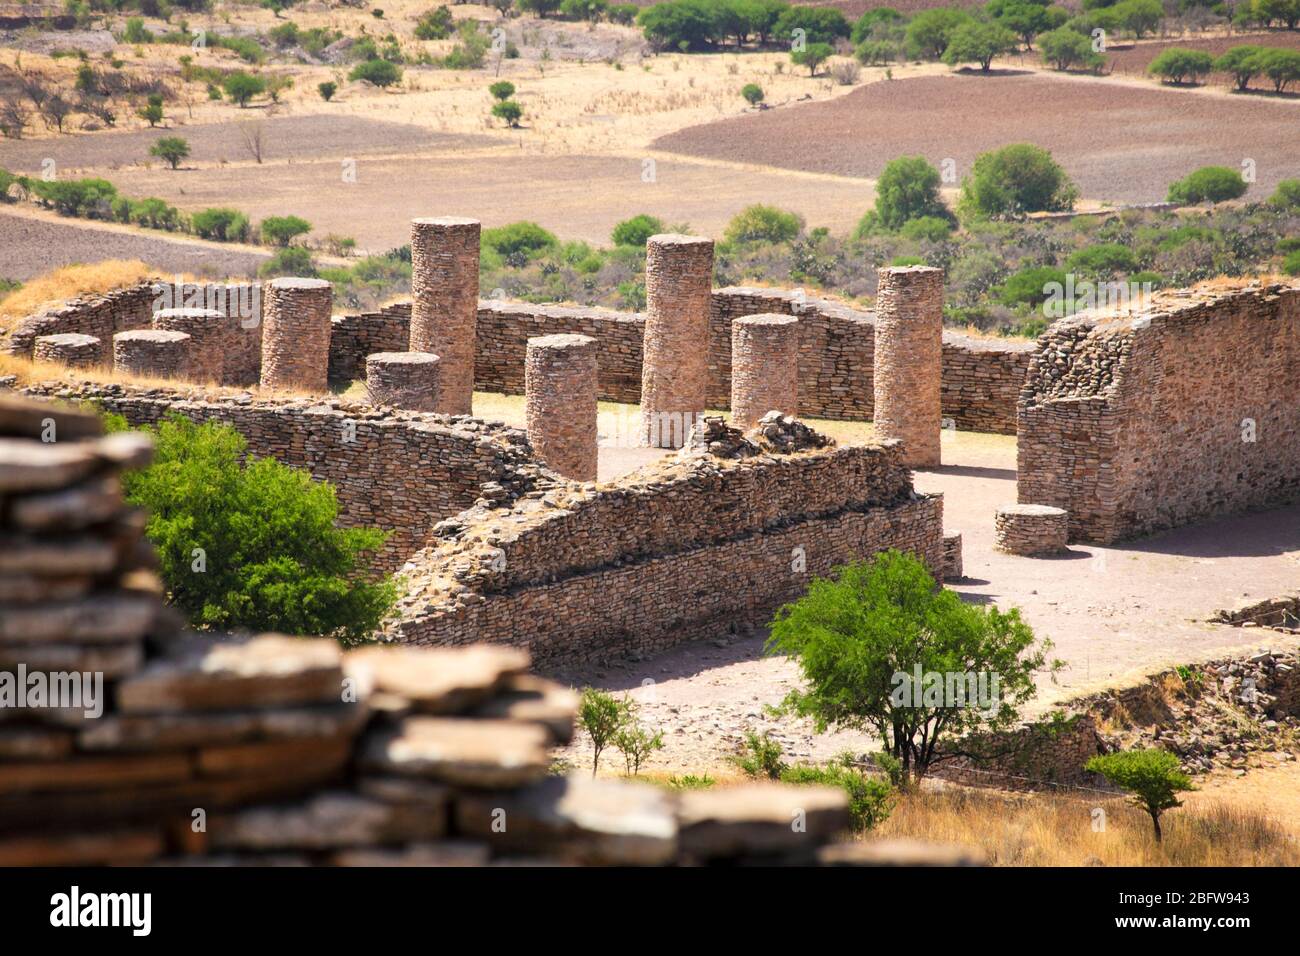 Remains of ancient habitations at Chicomoztoc, Zacatecas, Mexico. Stock Photo